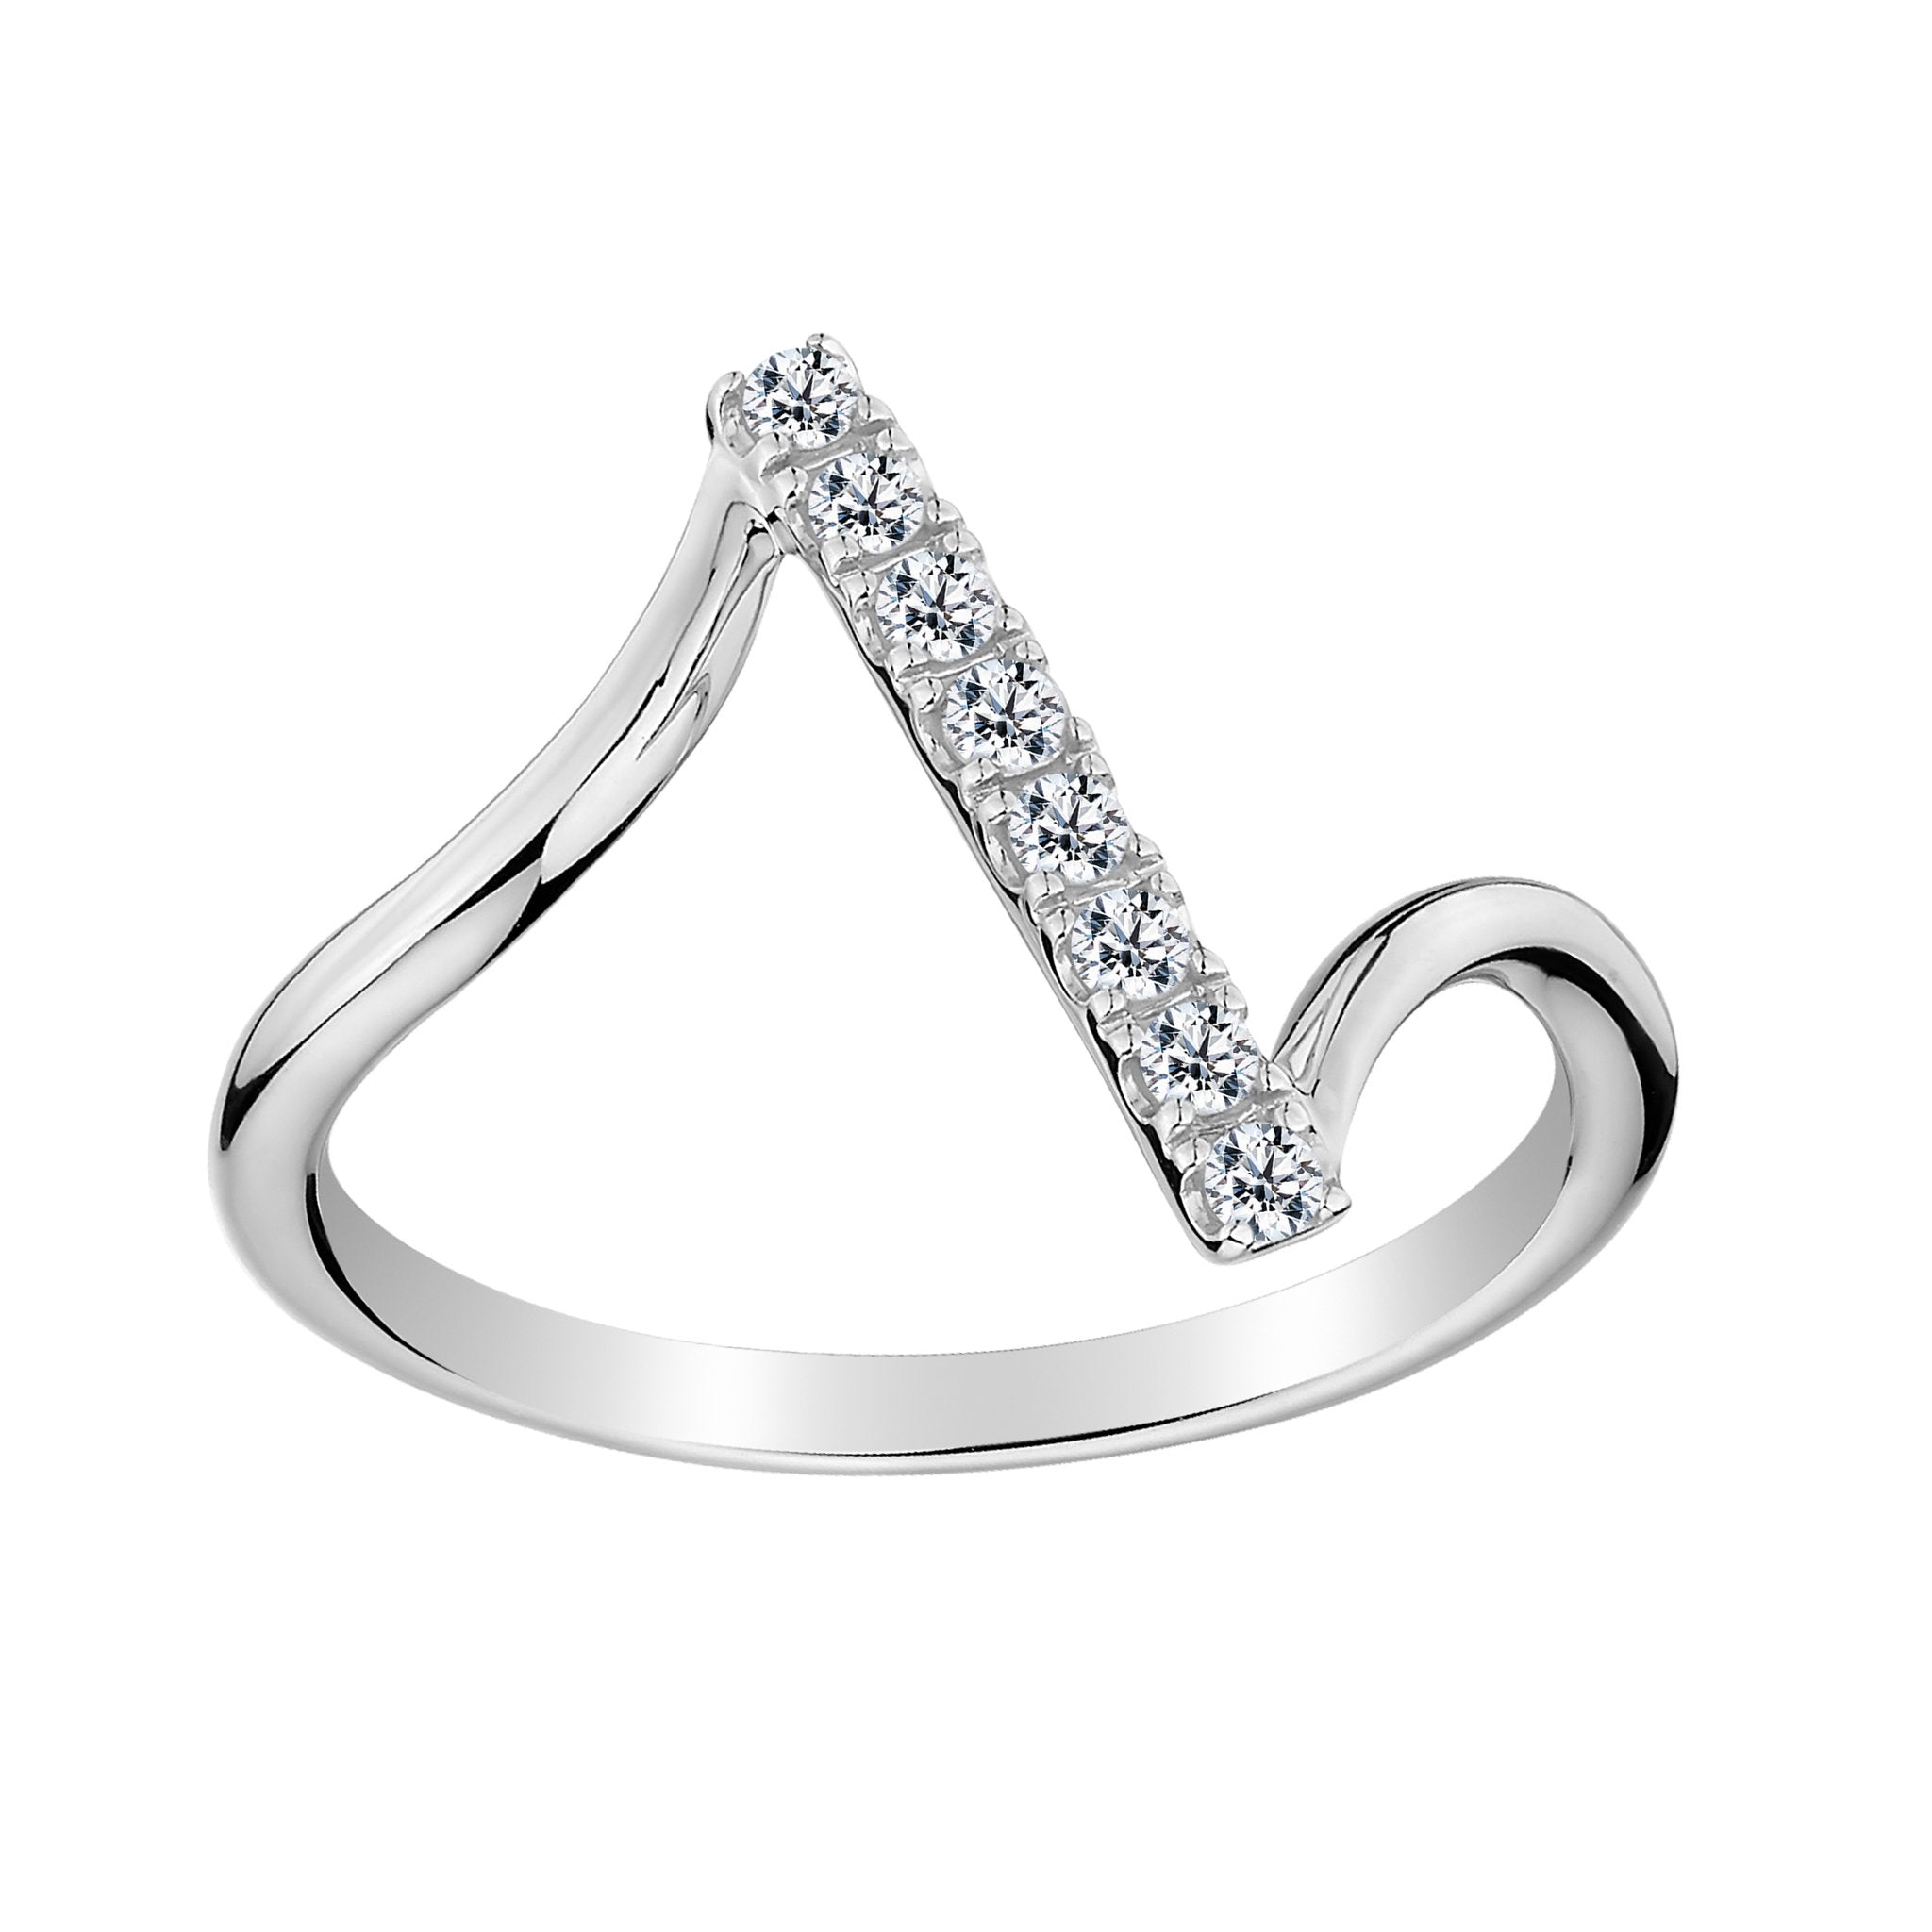 .16 CARAT DIAMOND RING, 10kt WHITE GOLD. Fashion Rings - Griffin Jewellery Designs